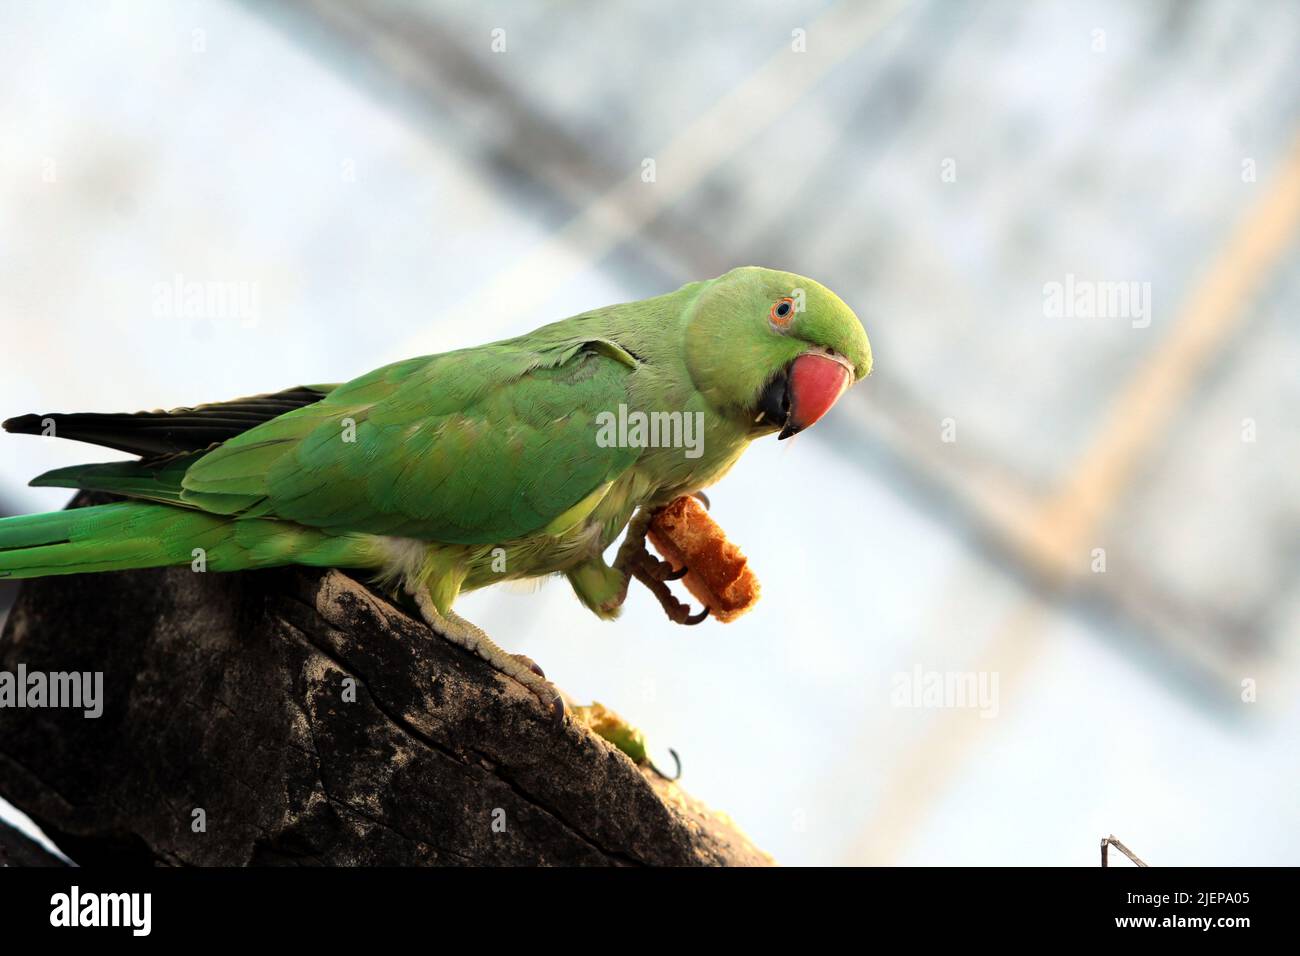 green parrot eating a bread Stock Photo